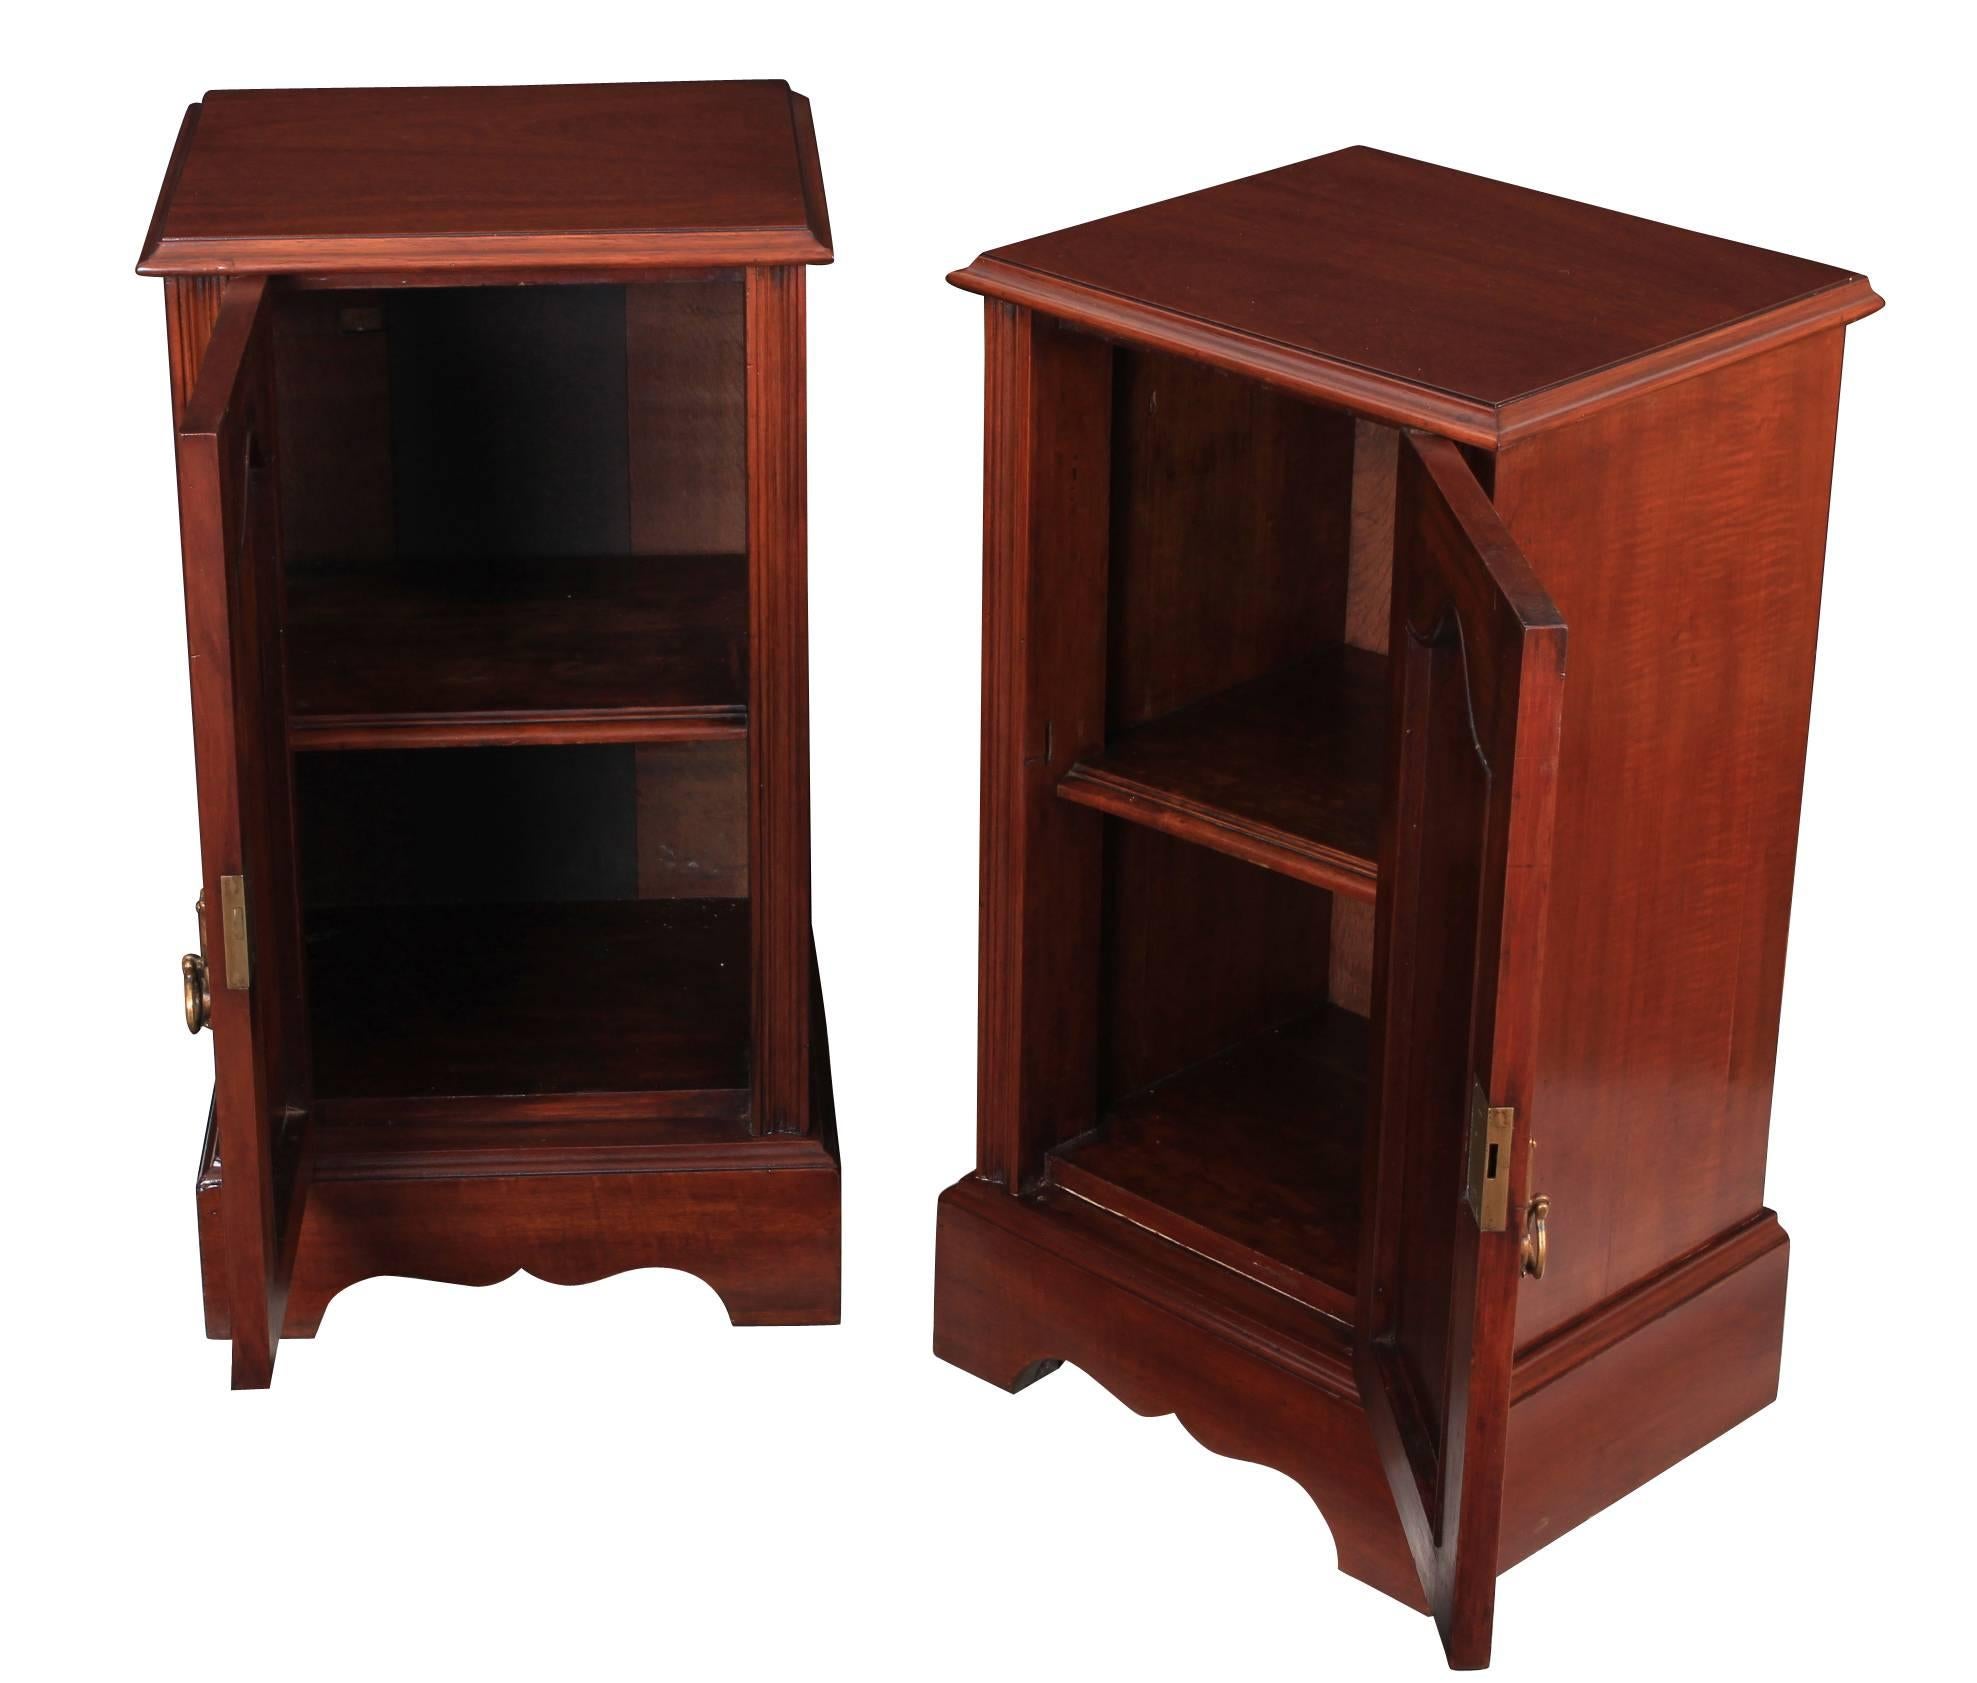 English, circa 1900.
This Edwardian pair of bedsides are in lovely condition, with decorative carved solid mahogany panelled doors.
Inside each is a single shelf.
With brass drop handles.

         